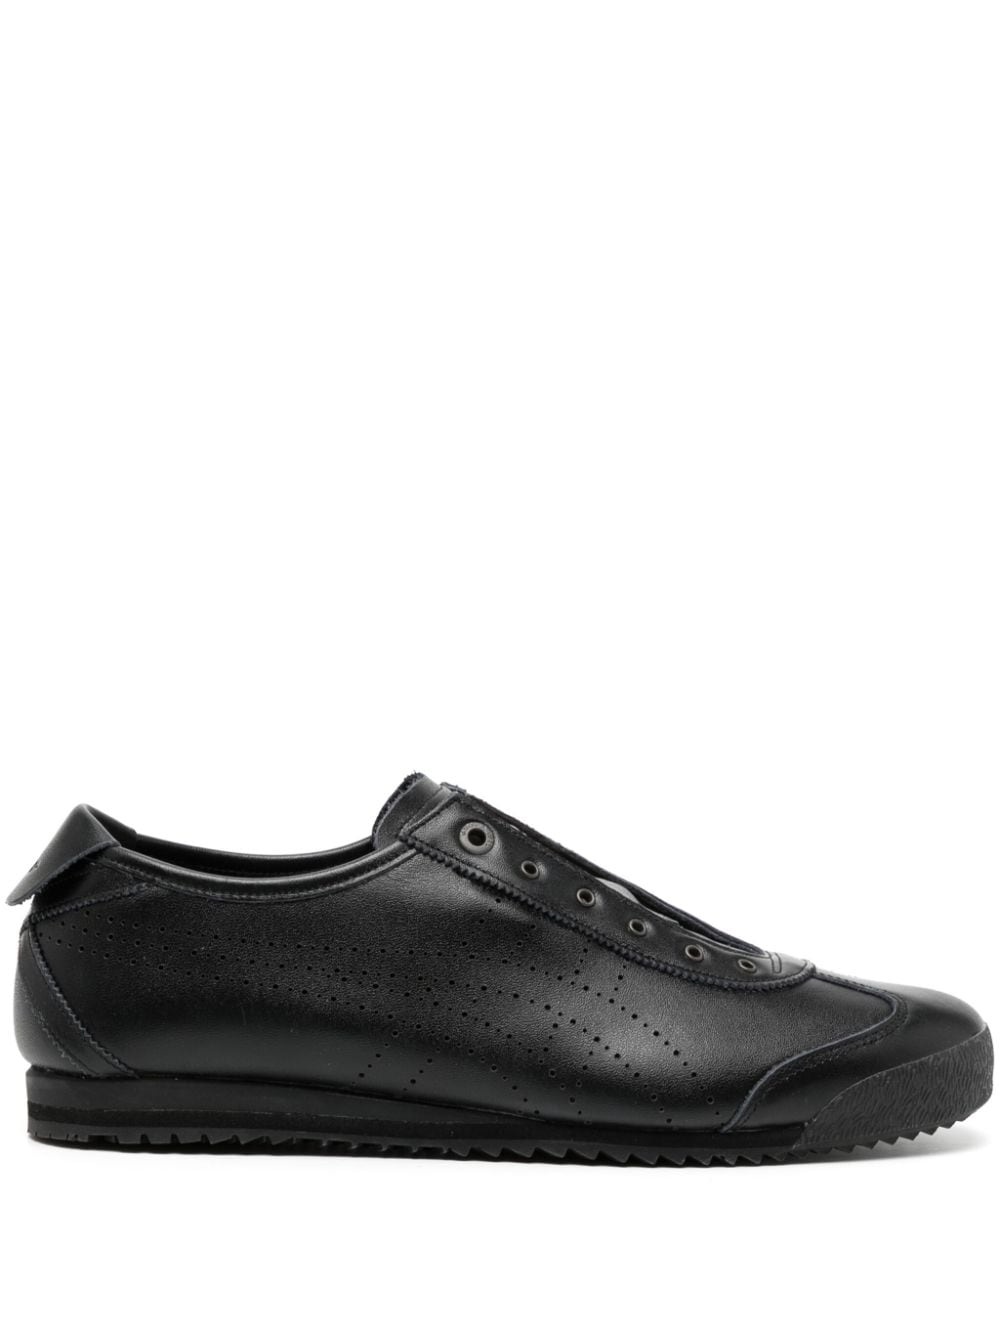 Onitsuka Tiger Mexico 66 Slip-on Sneakers In Black